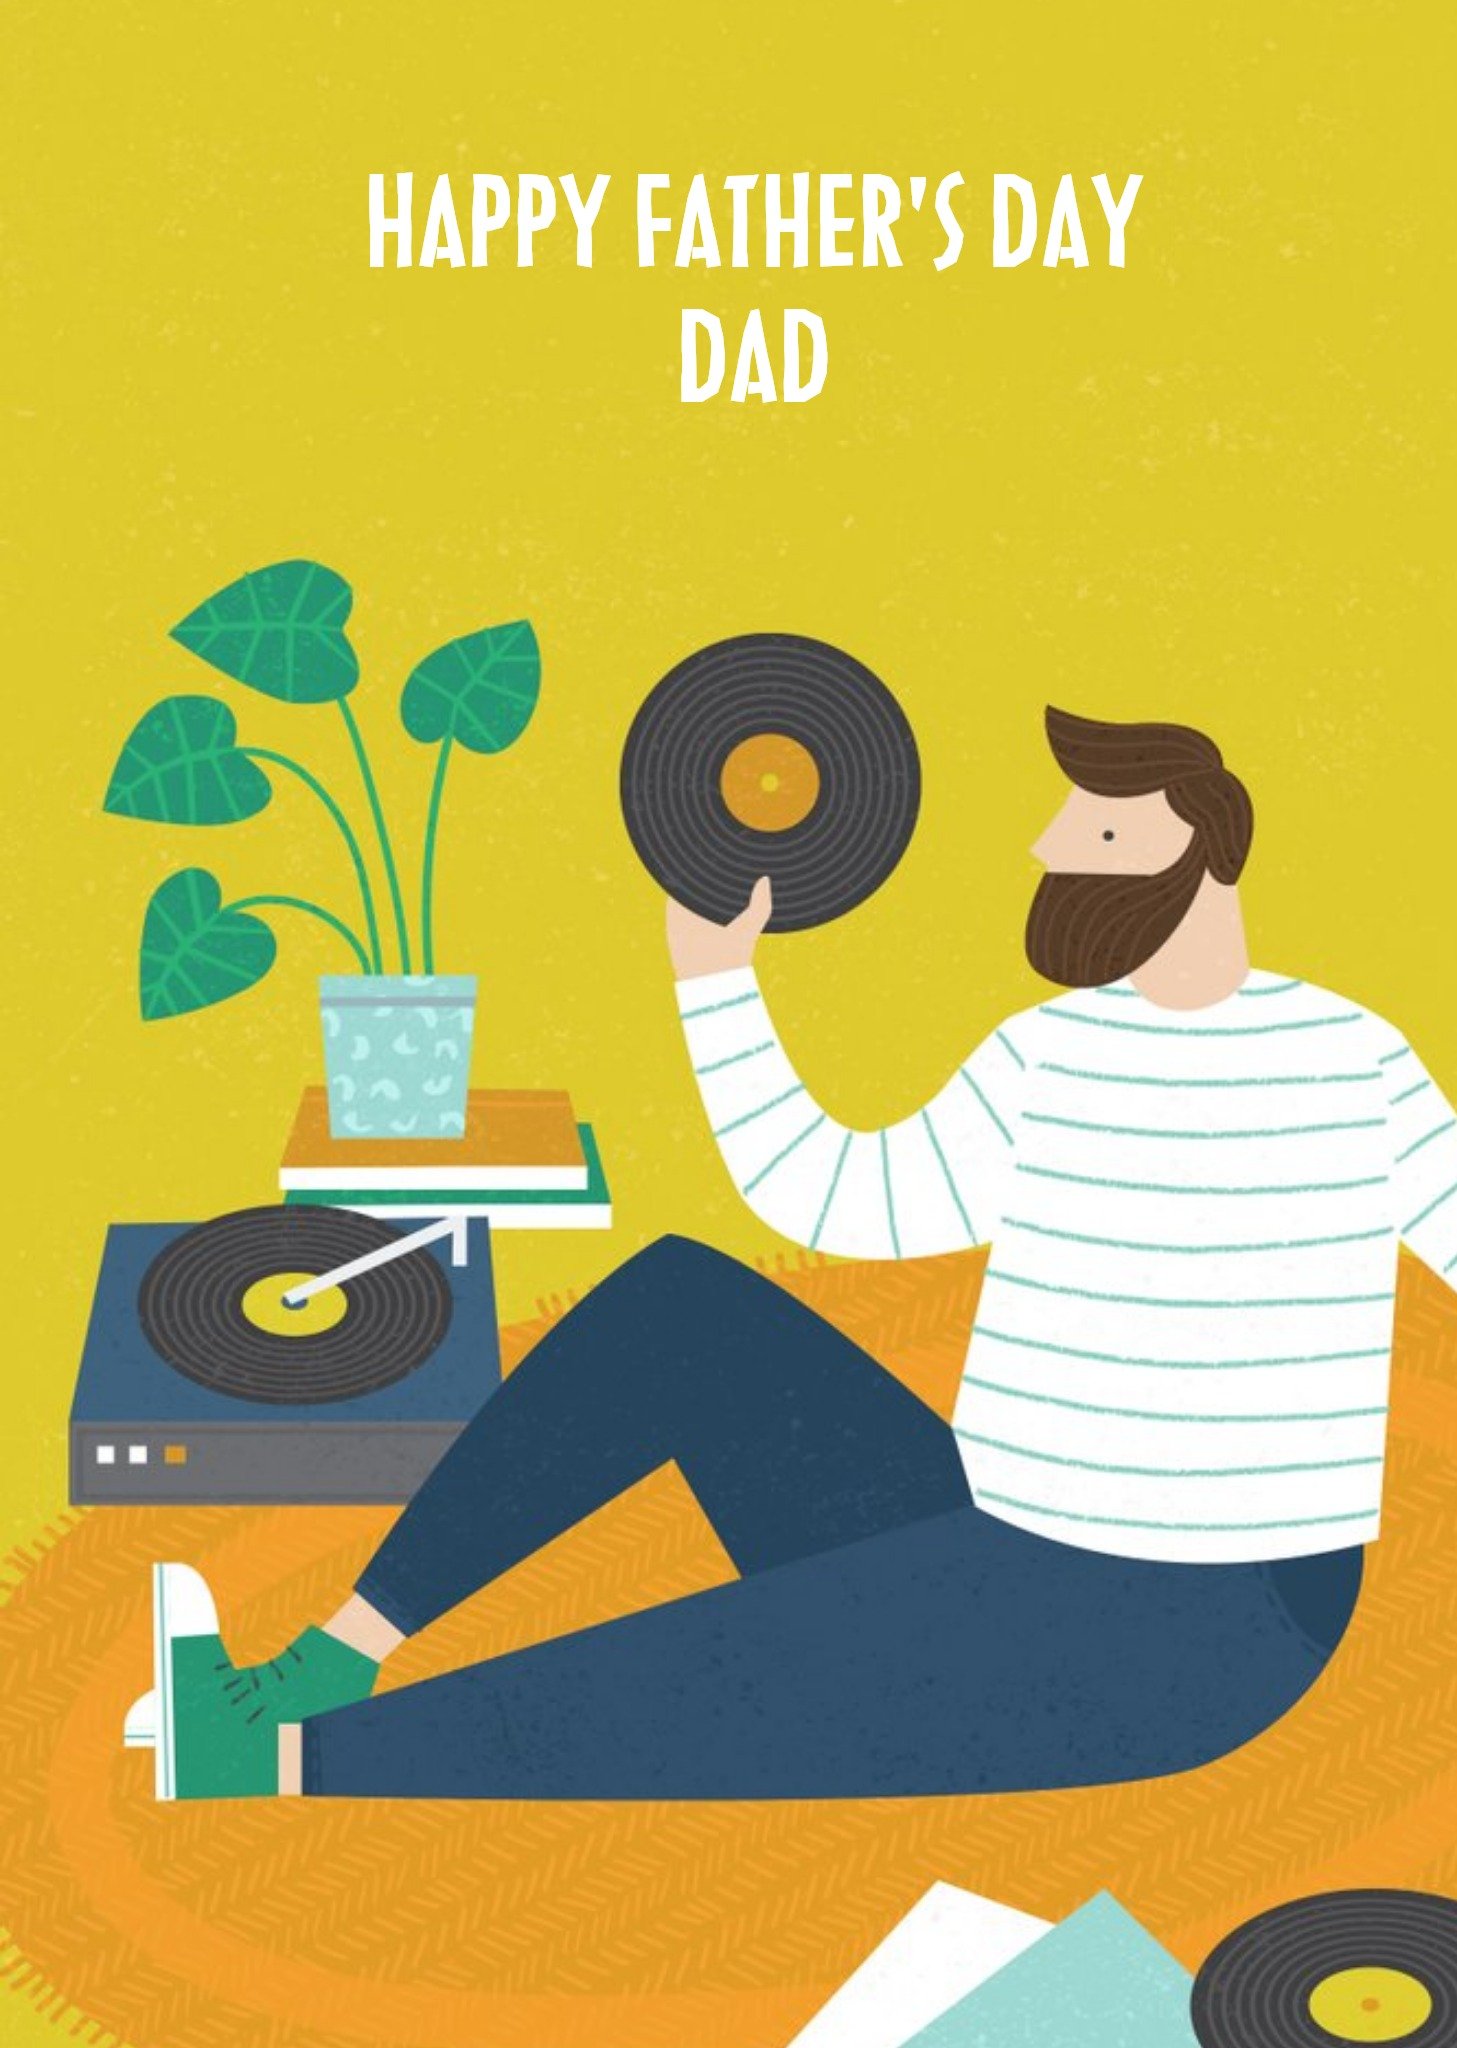 Moonpig Colourful & Bright Vinyl Record Playing Dad Father's Day Card, Large